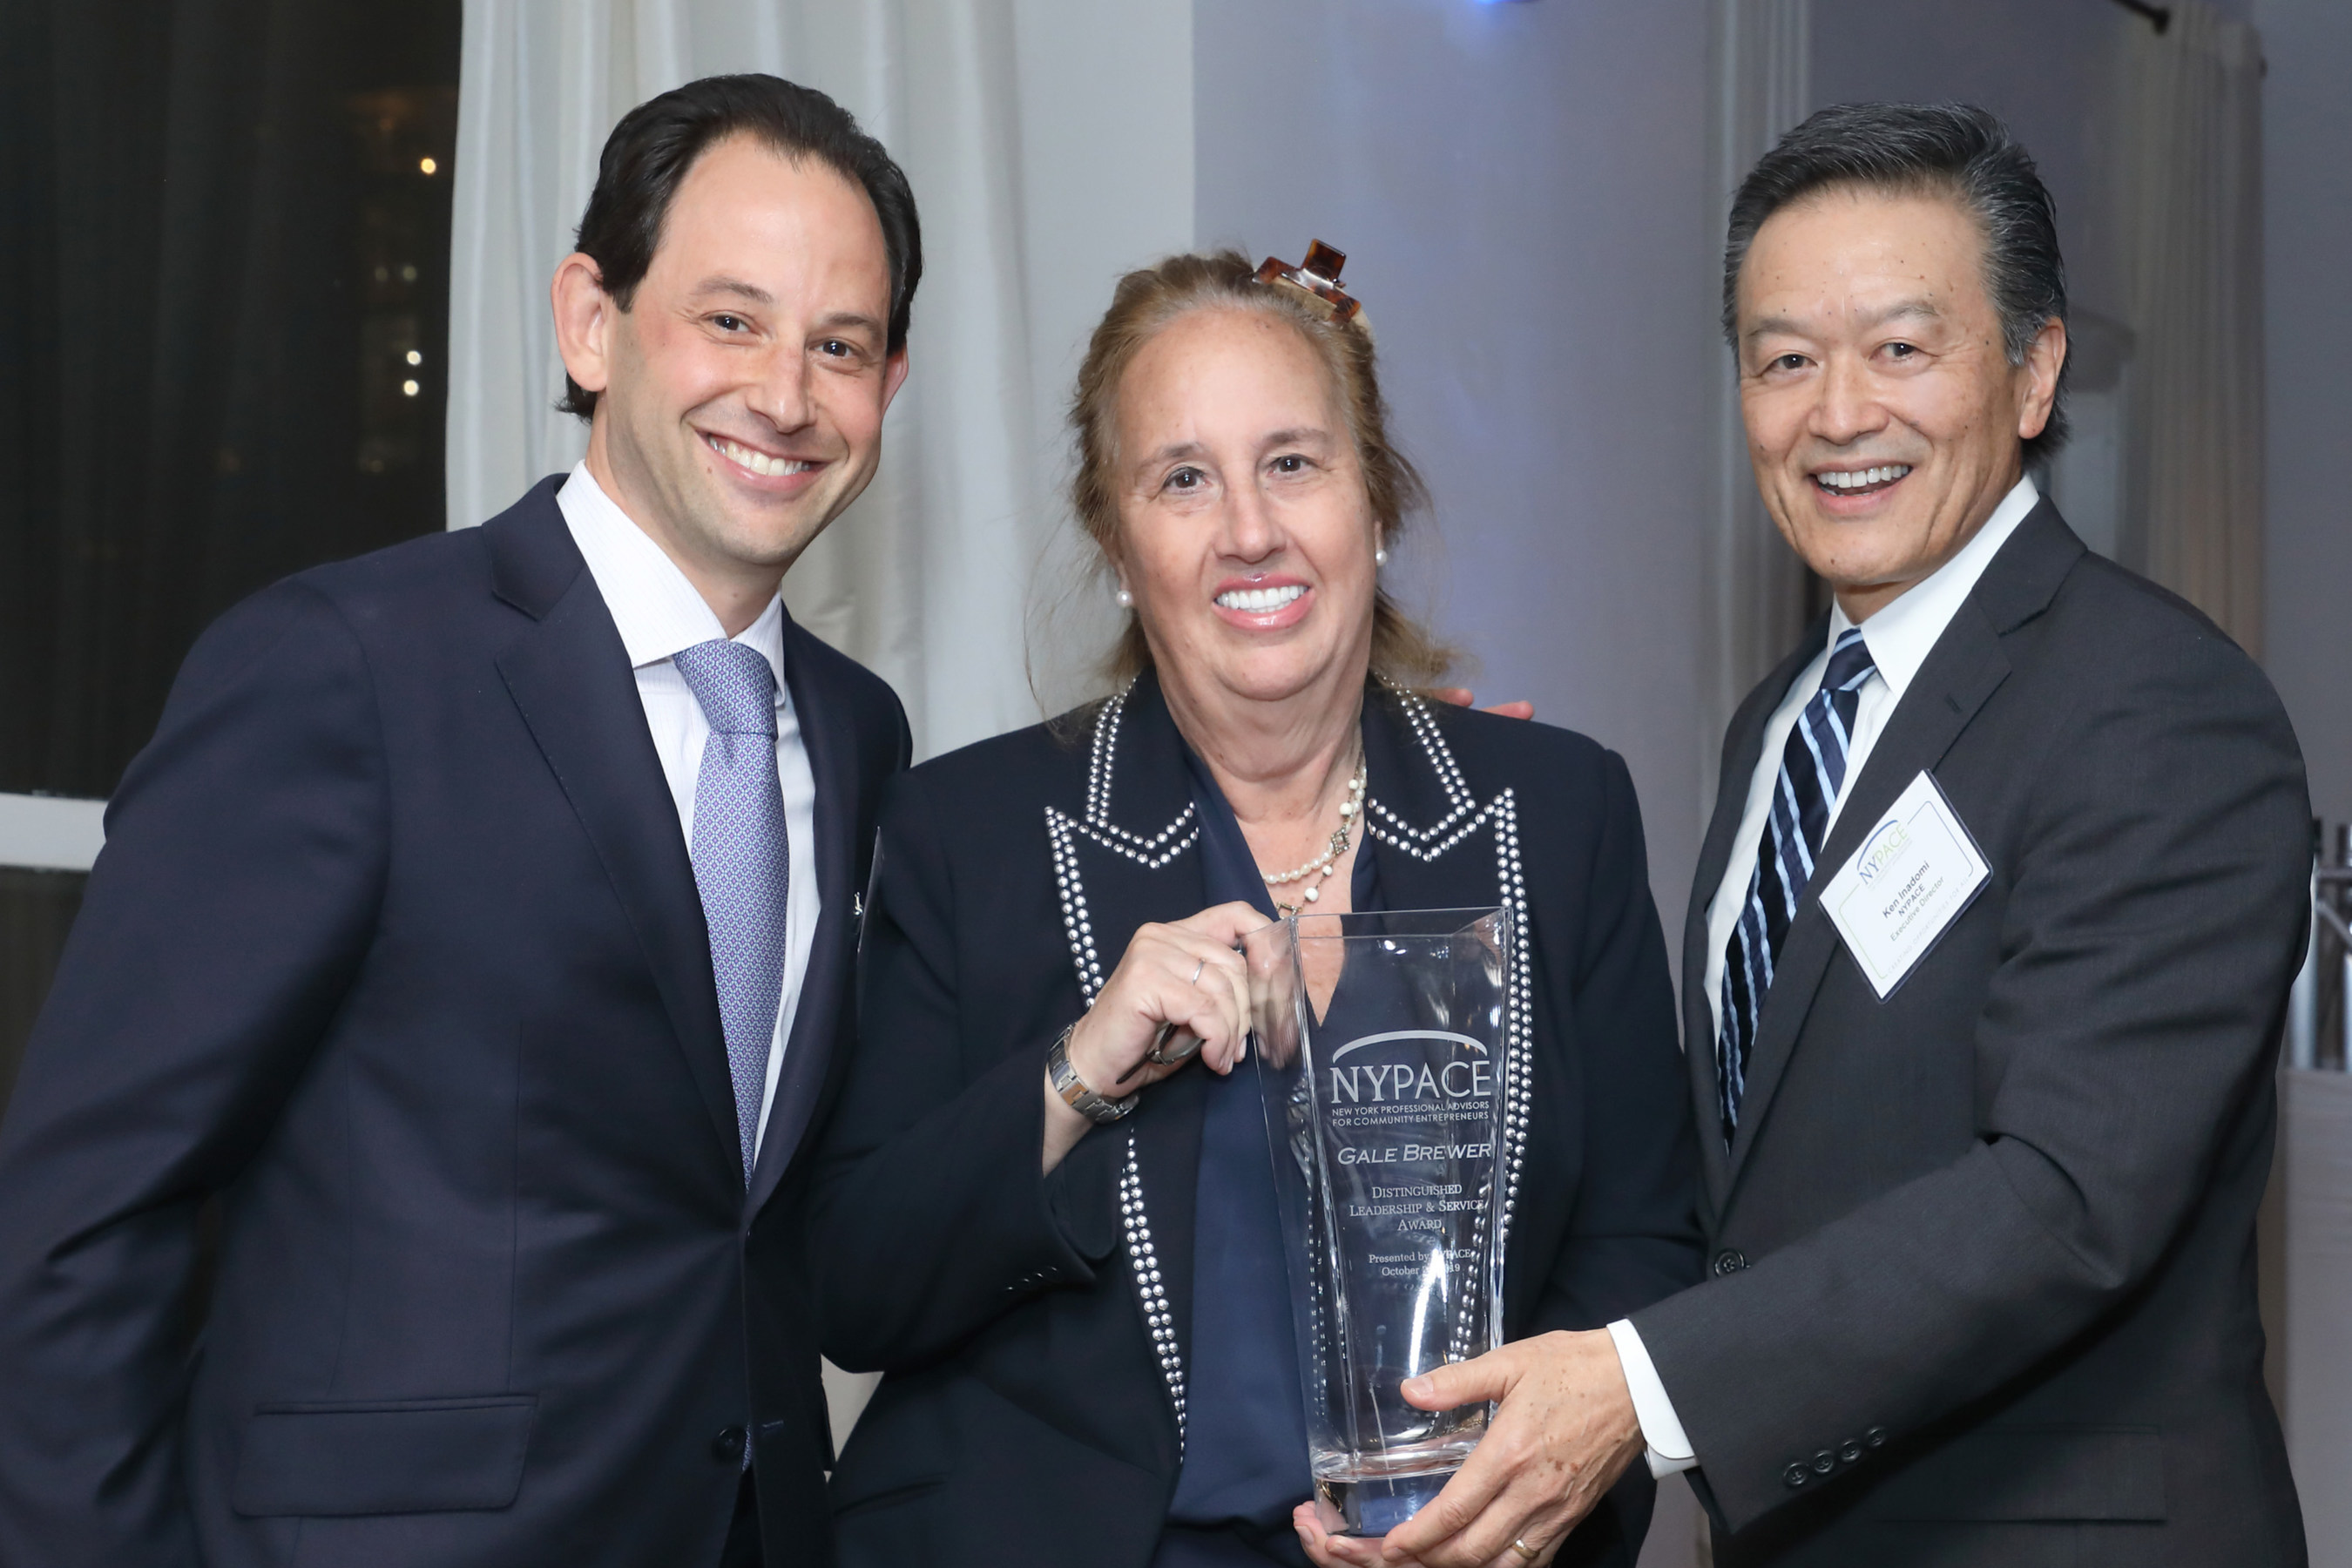 NYPACE's 8th Annual Fall Fundraiser Celebrates Empowering Entrepreneurship in New York City